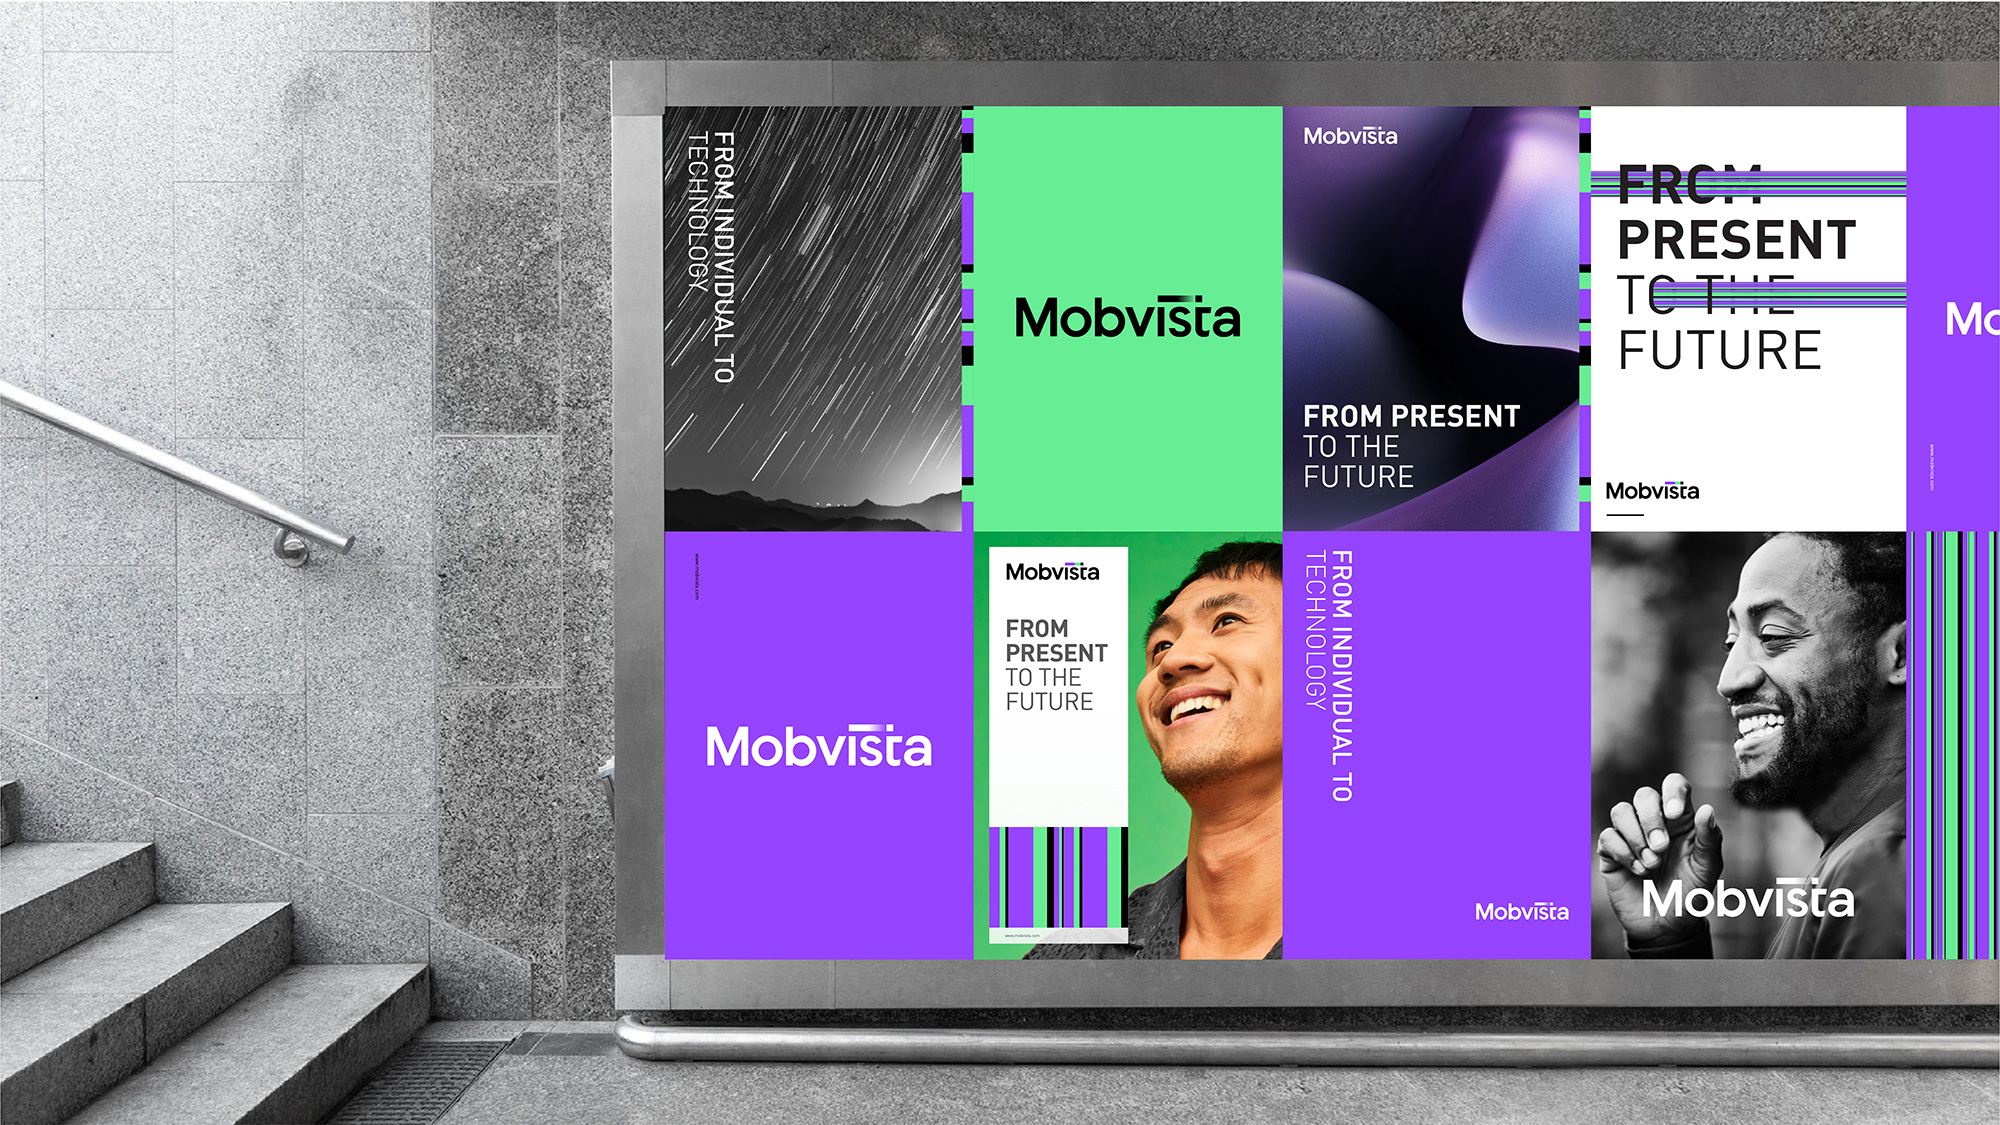 New Logo and Identity for Mobvista by Futurebrand